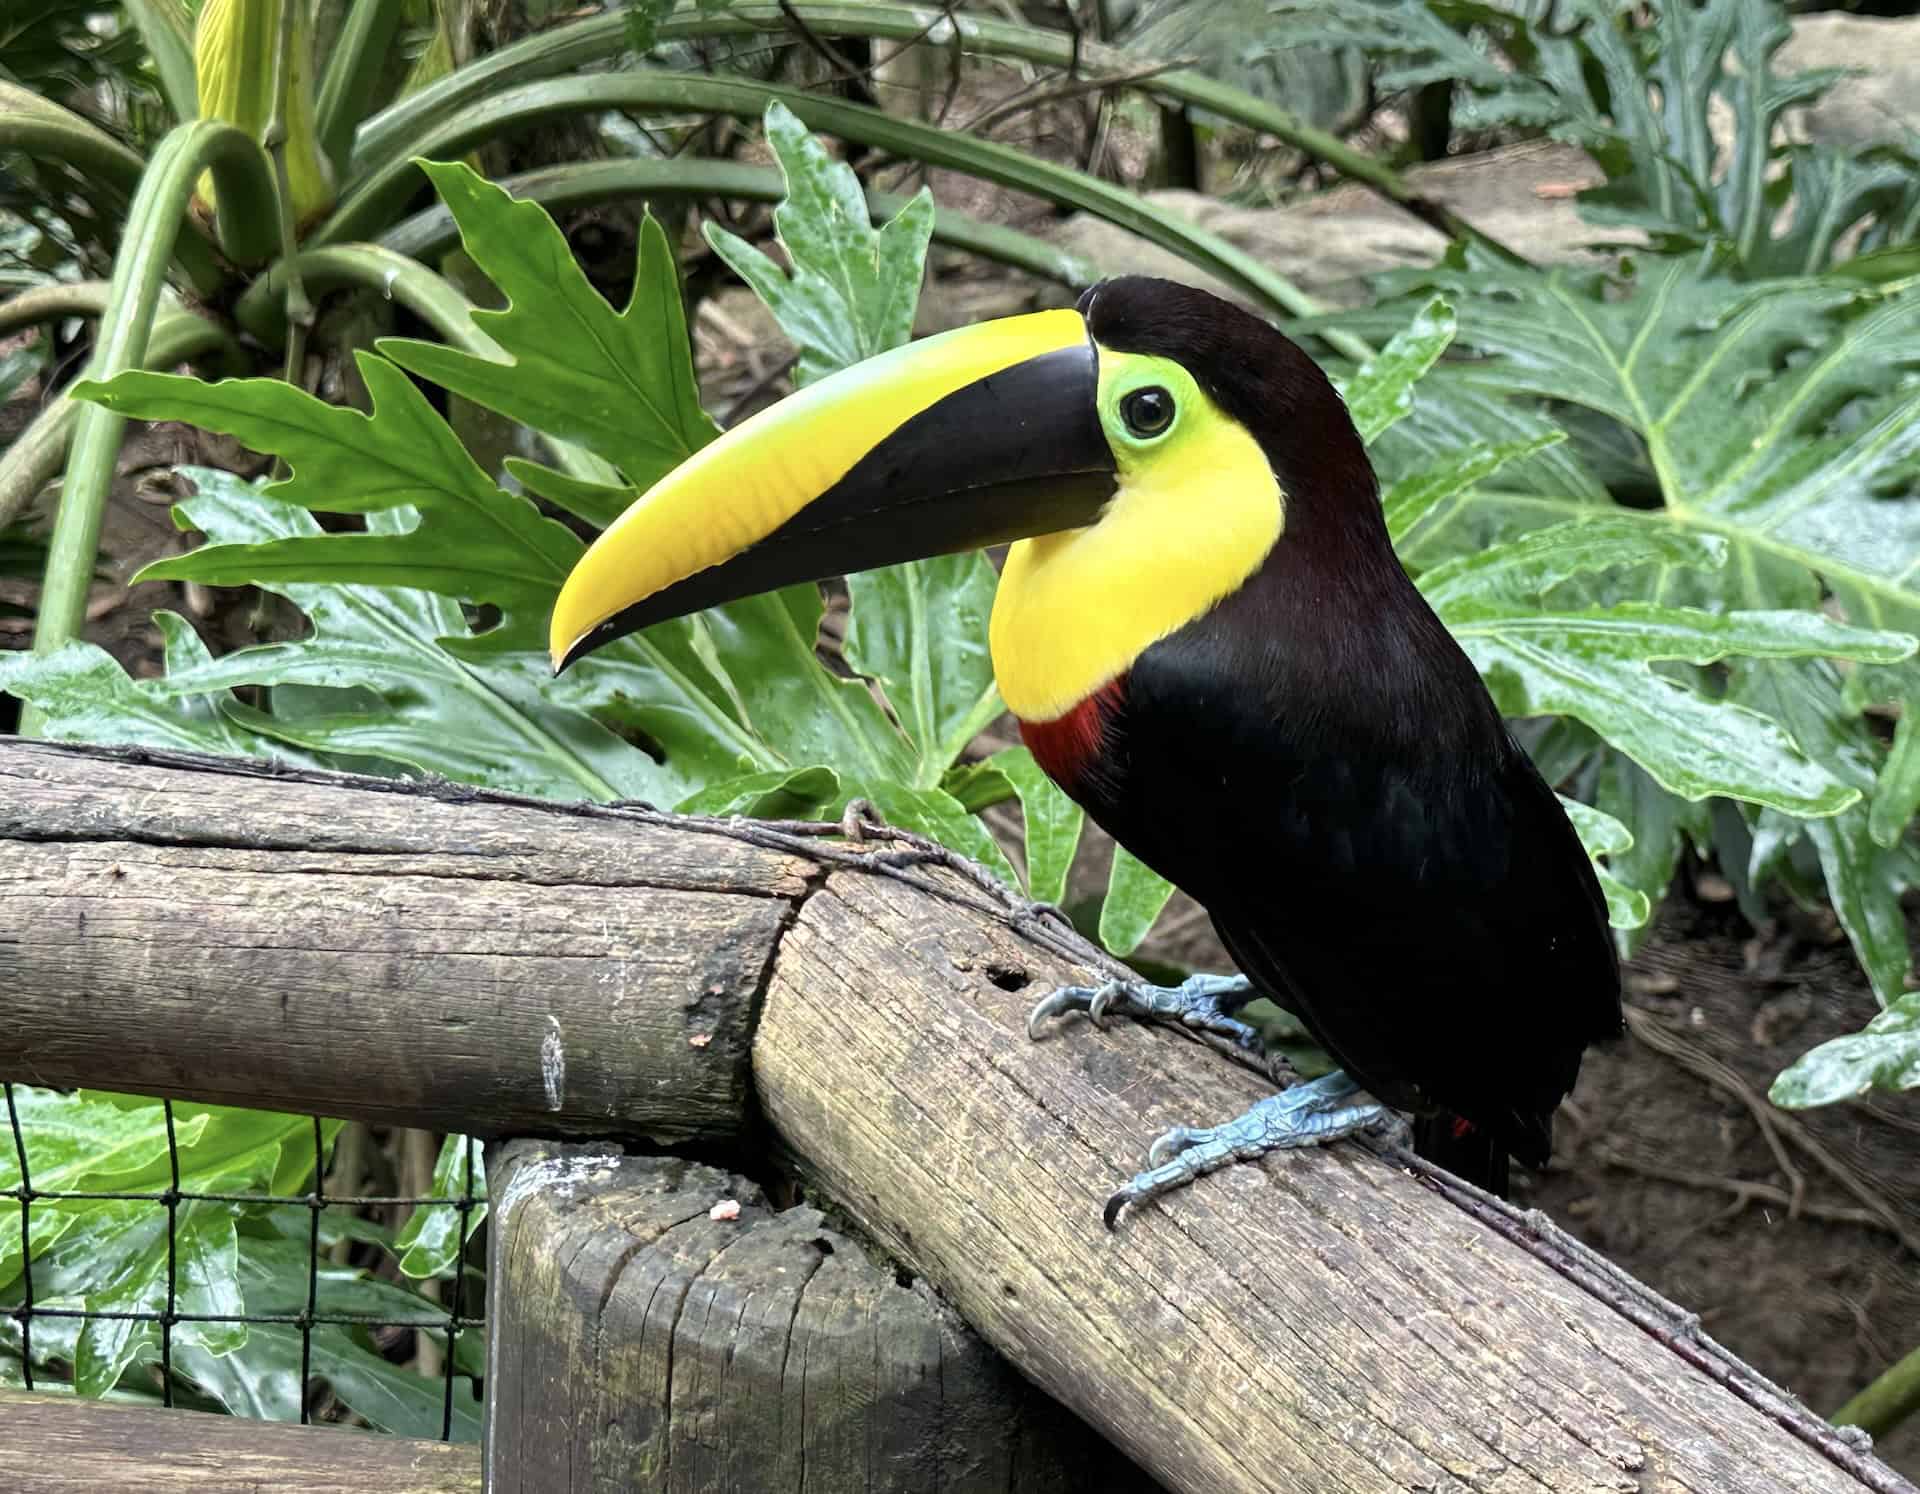 Toucan in the Andean Forest at Bioparque Ukumarí in Risaralda, Colombia